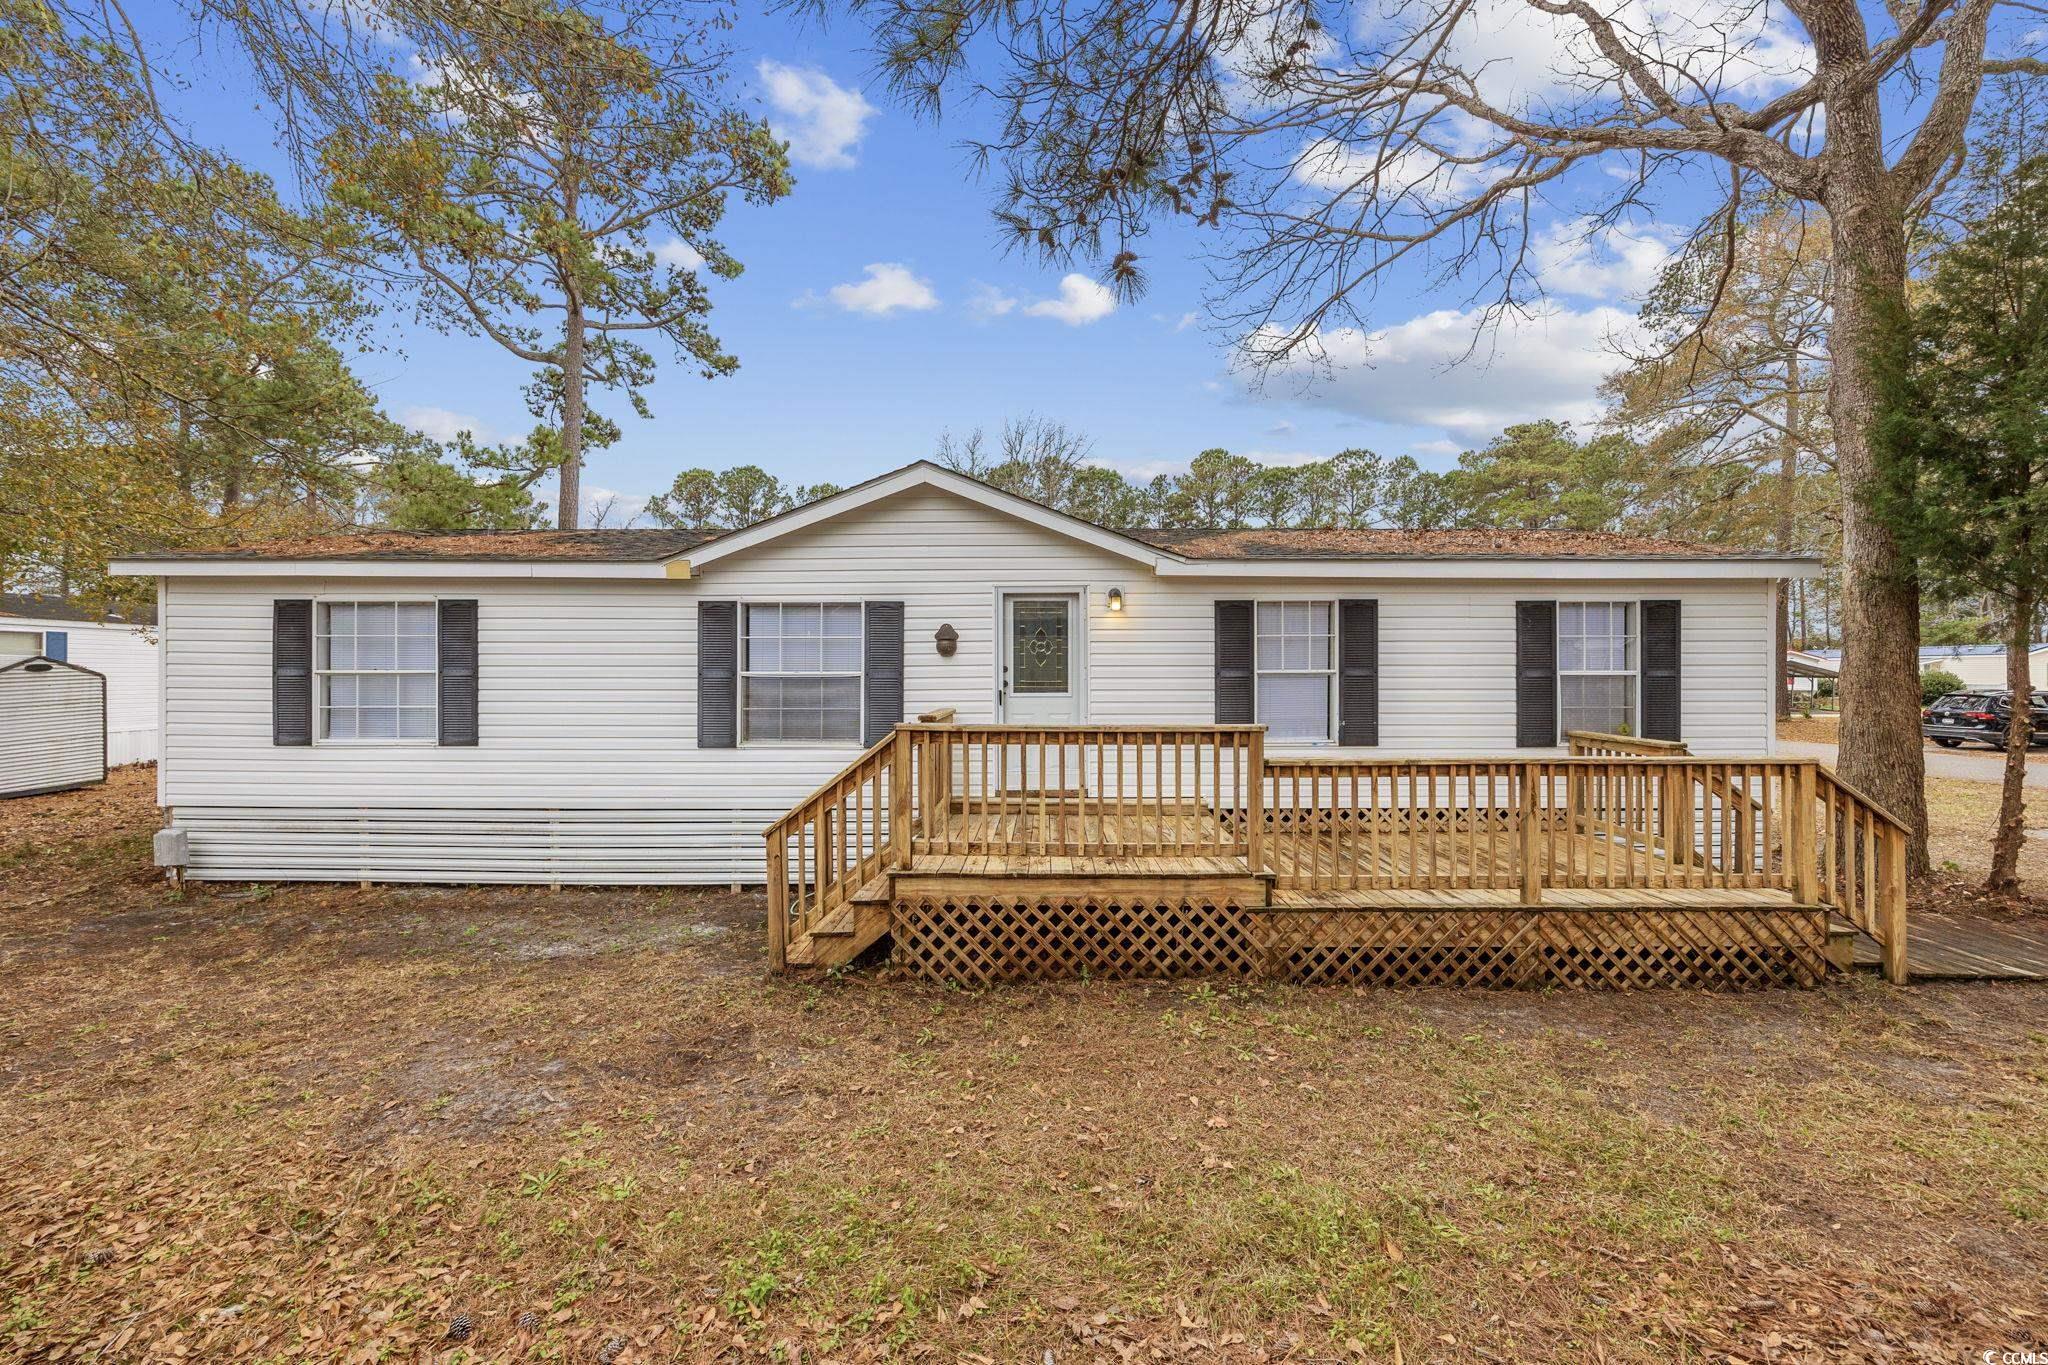 price improvement!!! experience coastal living in this delightful 3-bedroom, 2-bathroom double-wide manufactured home within the peaceful windjammer village. this property is the perfect blank slate and ready for new owners. the interior has been refreshed and features a spacious living area, an inviting kitchen, and a large outdoor deck perfect for grilling and entertaining. enjoy the community's amenities, including a pool and clubhouse. this home is centrally located just moments away from some of the areas biggest draws. hop on your golf cart and enjoy the sun-drenched beaches and fishing off the garden city pier. or explore the lively bars and restaurants along murrells inlet marshwalk, or reconnect with nature at nearby brookgreen gardens and huntington state park. whether you're searching for a permanent residence or a vacation retreat, this property encapsulates the essence of coastal charm. book your tour today!